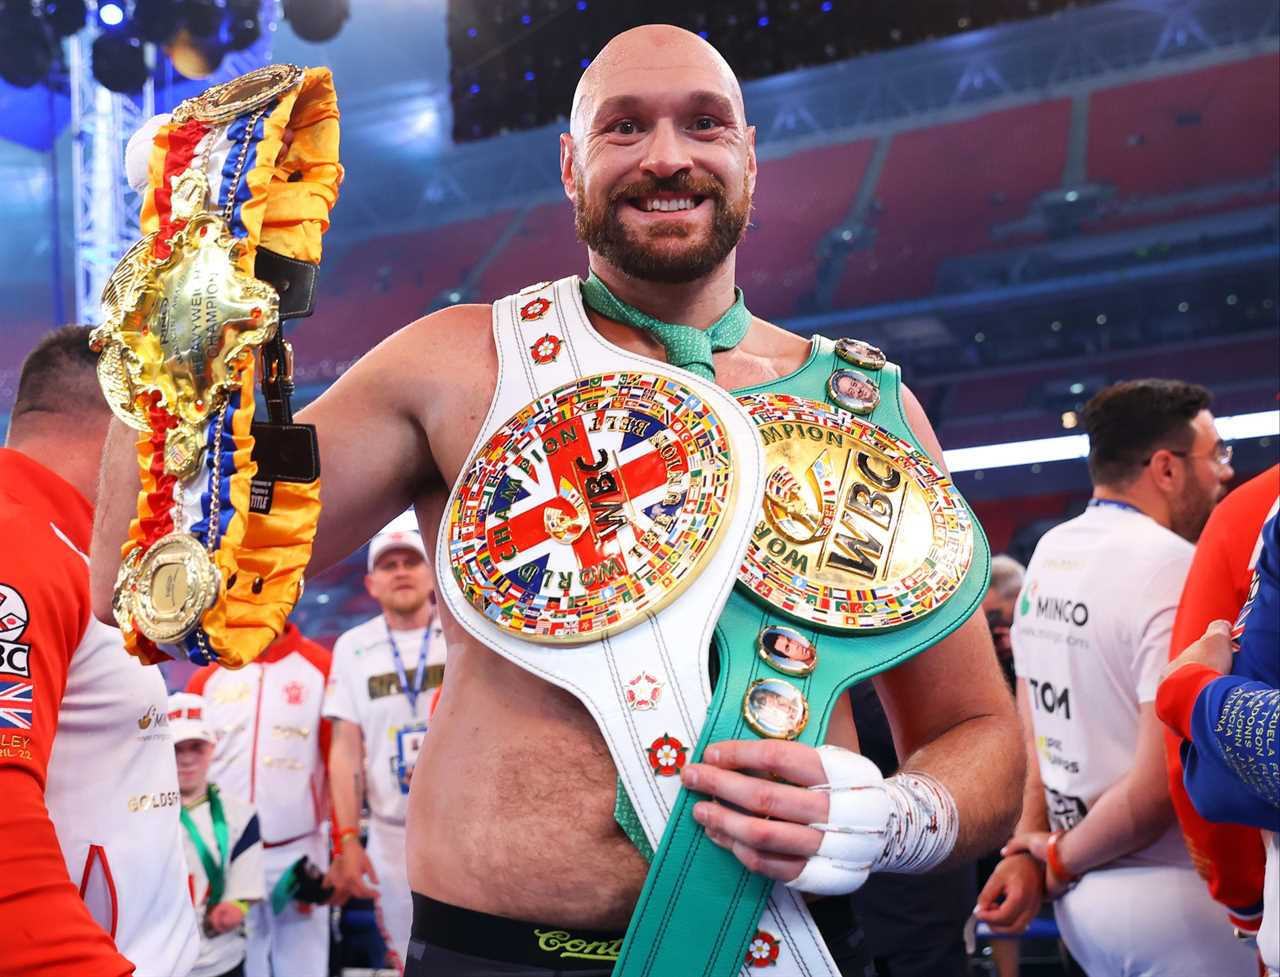 Tyson Fury has sent Anthony Joshua a contract. This confirms Frank Warren's confirmation that the Battle of Britain fight is getting closer